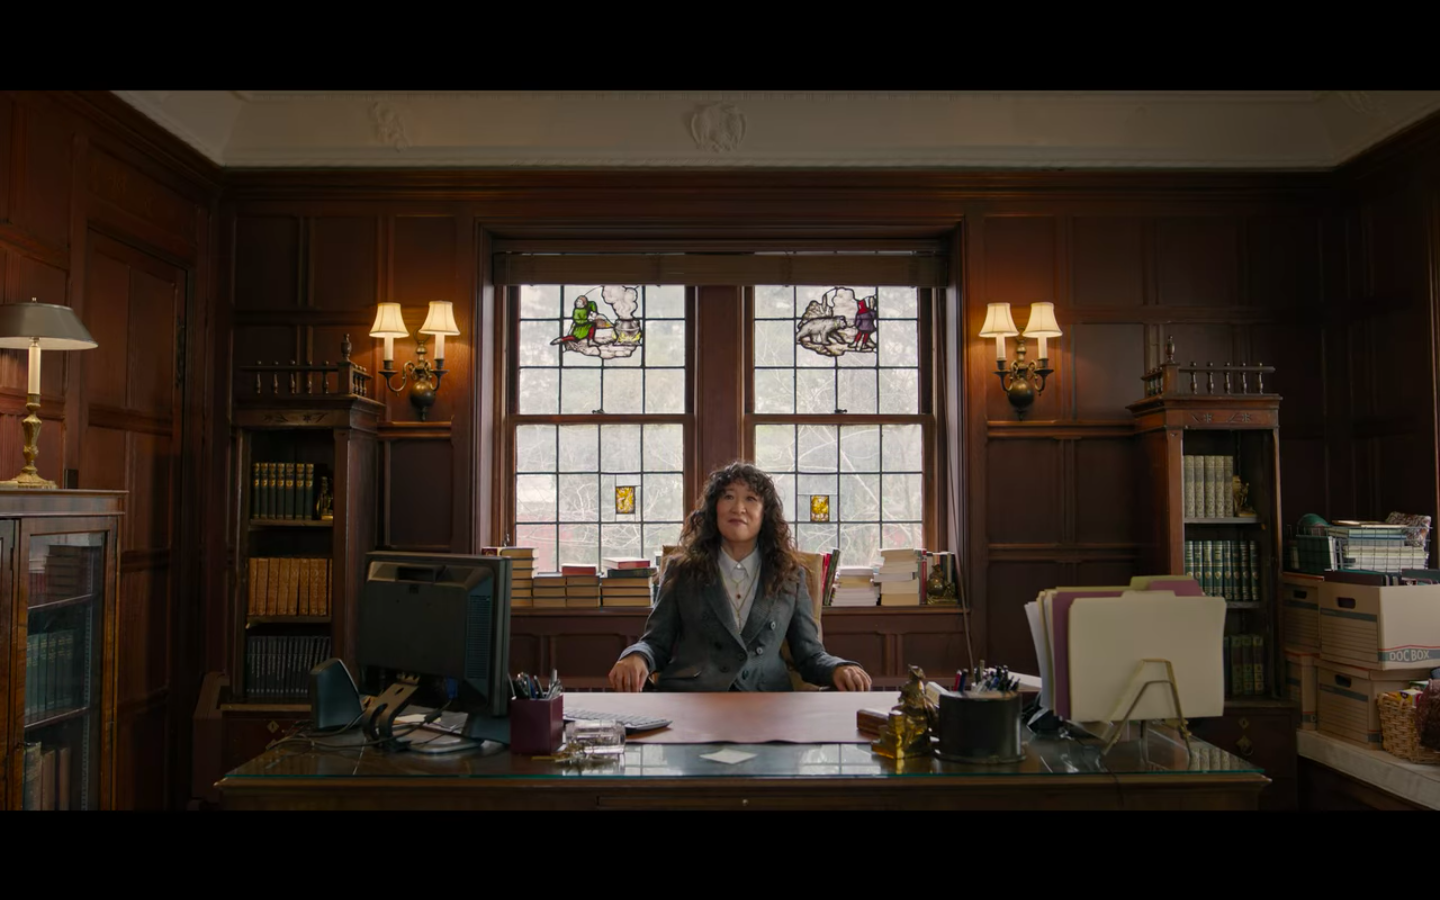 Ji-Yoon Kim sits in her new office as English Department chair at an Ivy League University